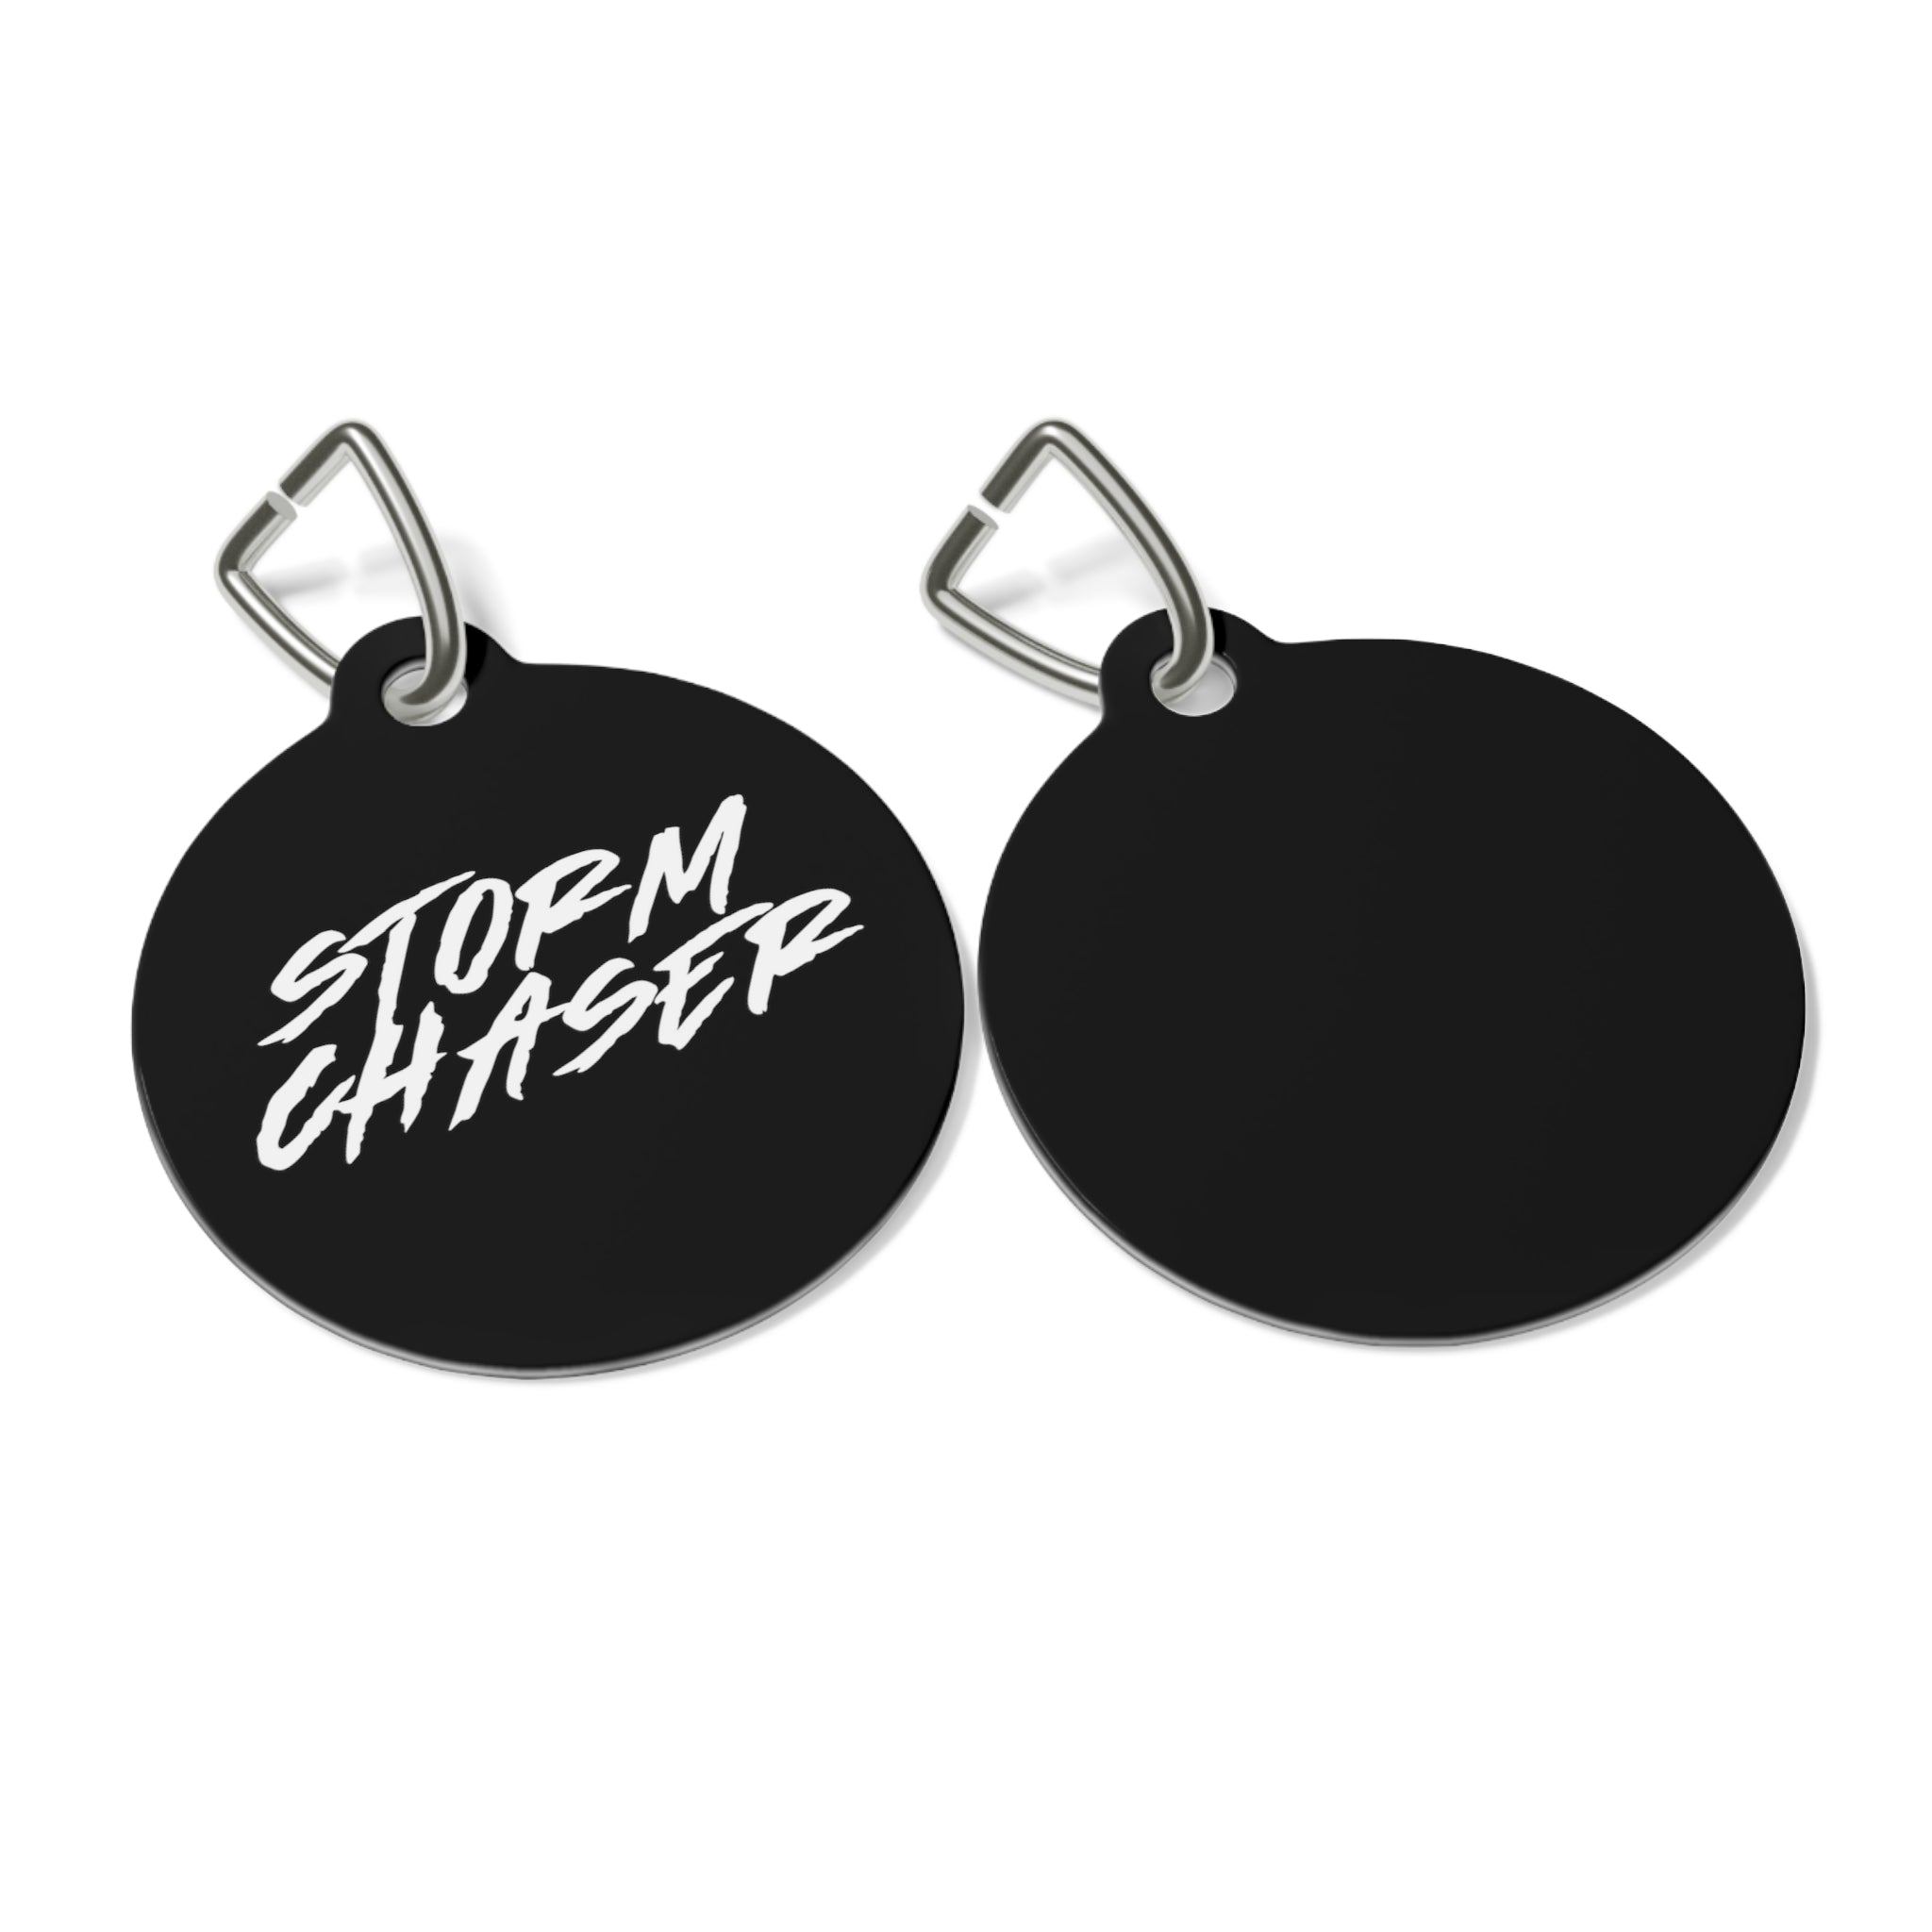 Storm Chaser Pet Tag 